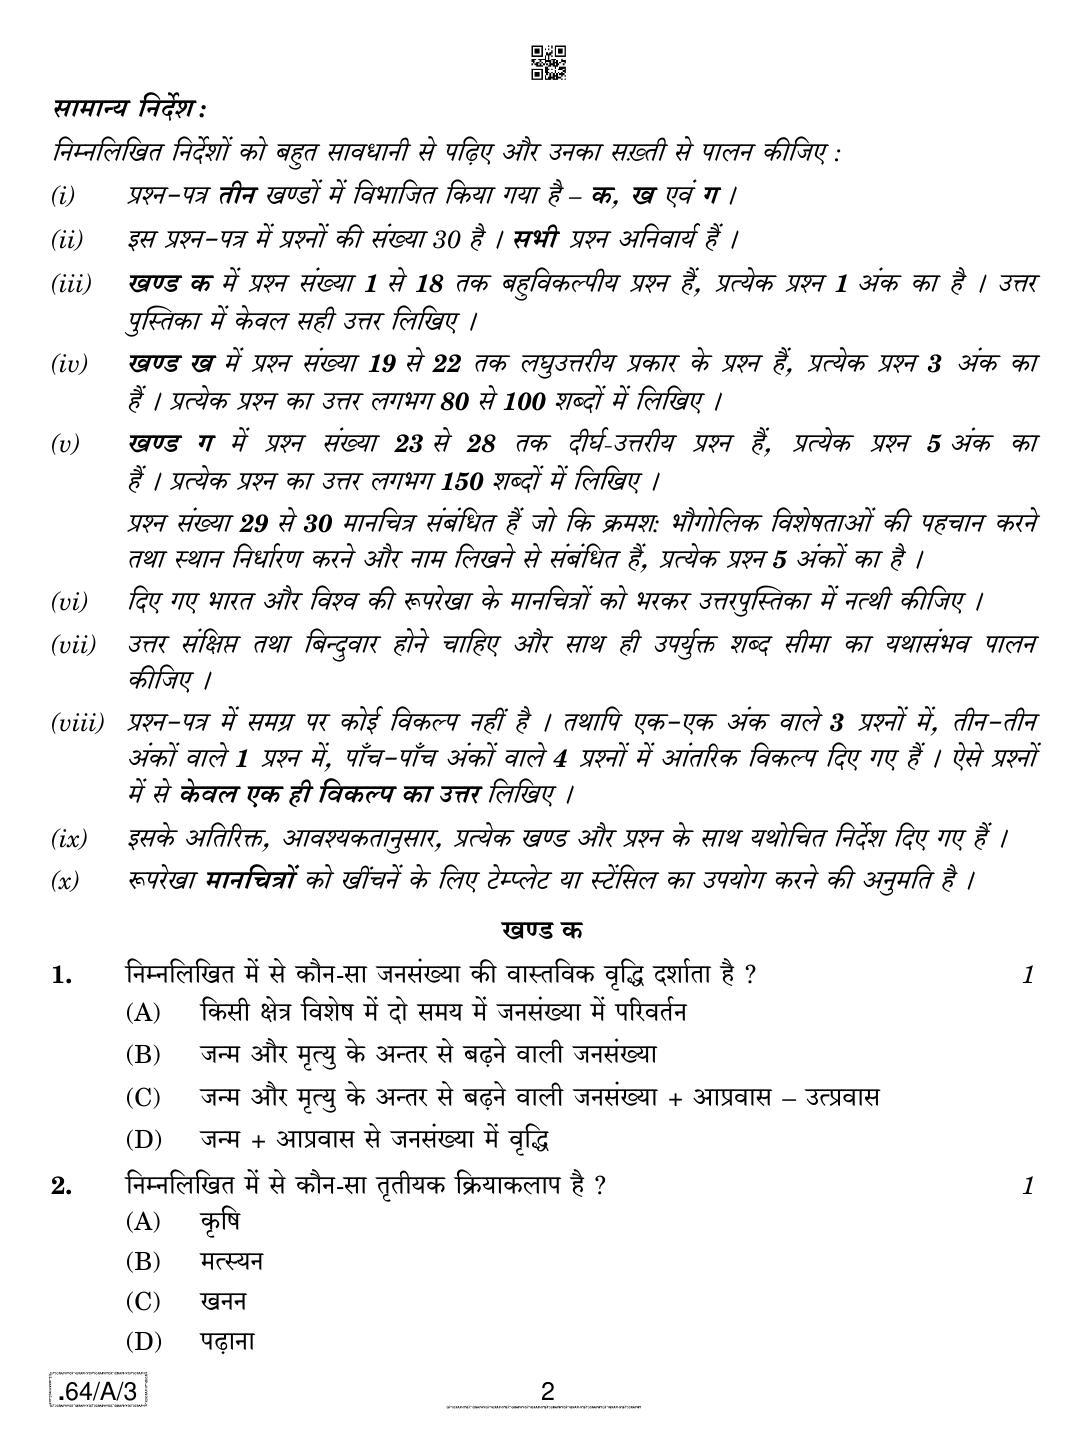 CBSE Class 12 64-C-3 - Geography 2020 Compartment Question Paper - Page 2